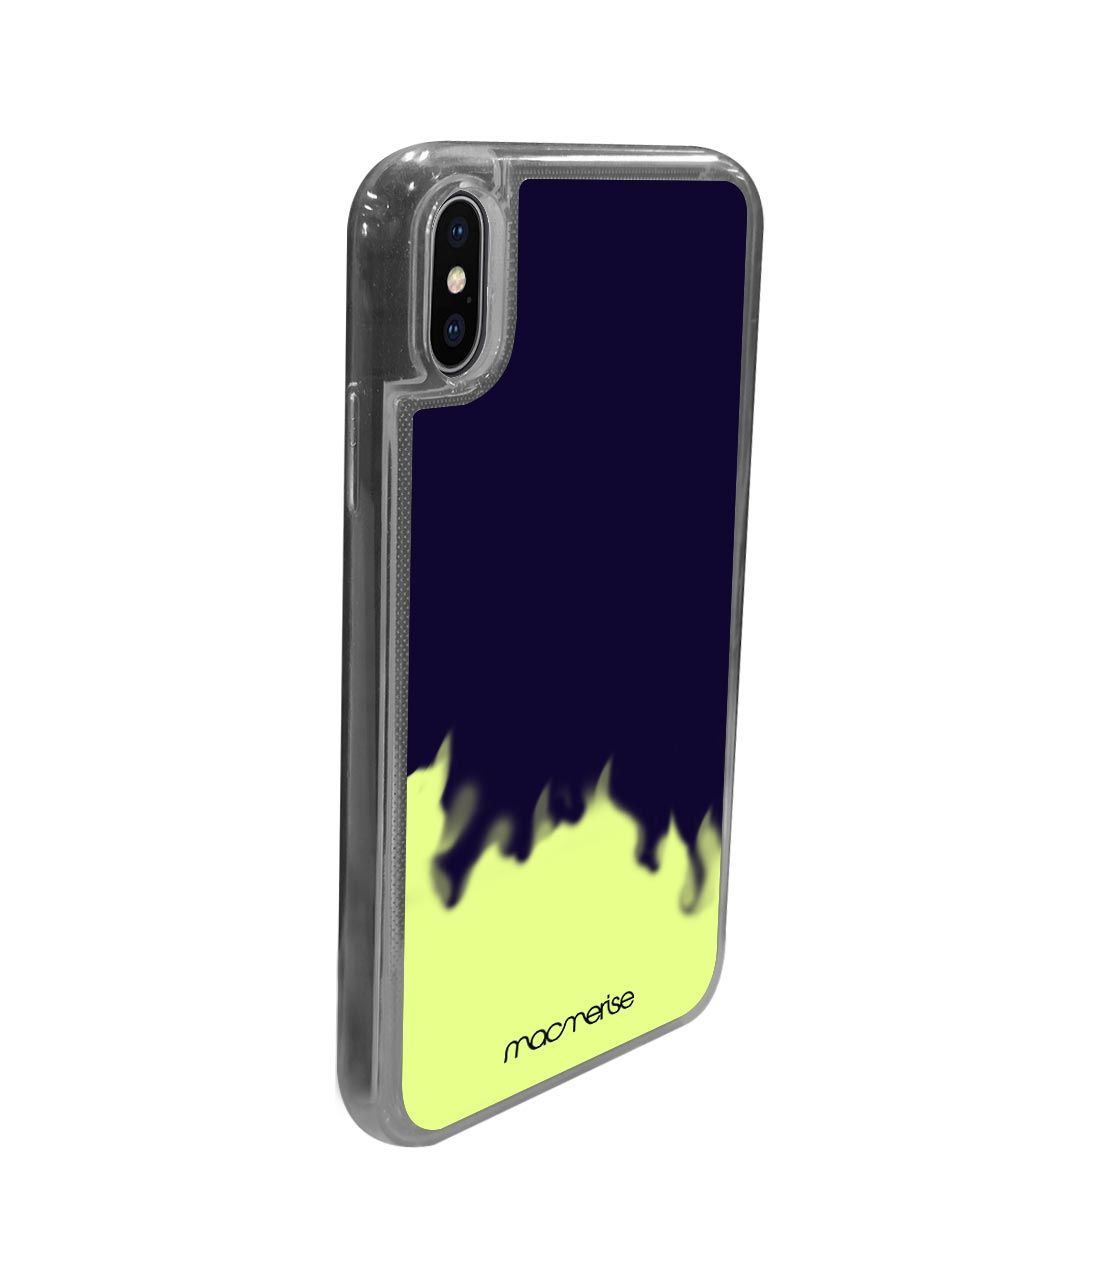 Neon Sand Blue - Neon Sand Phone Case for iPhone X